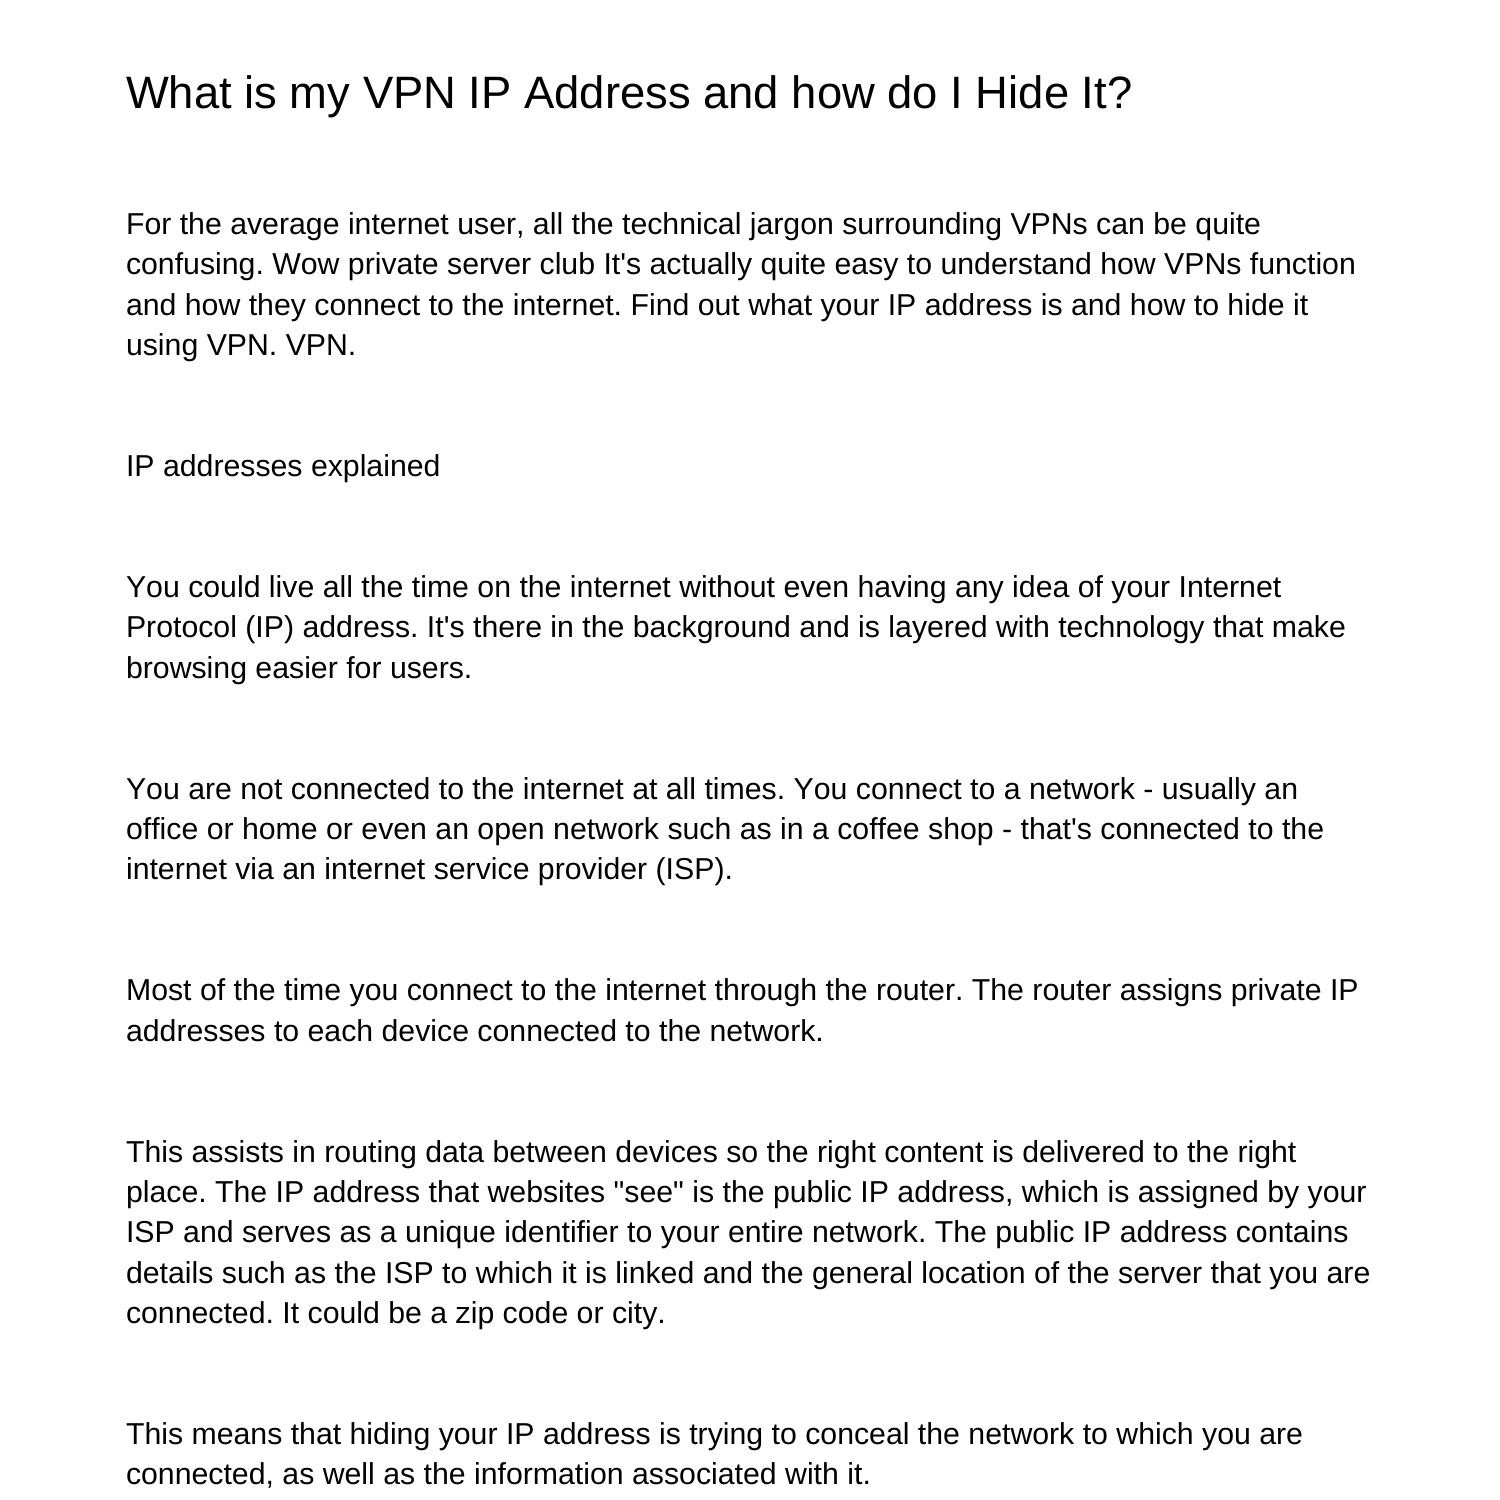 what-is-my-vpn-ip-address-and-how-can-i-hide-itflbgv-pdf-pdf-docdroid